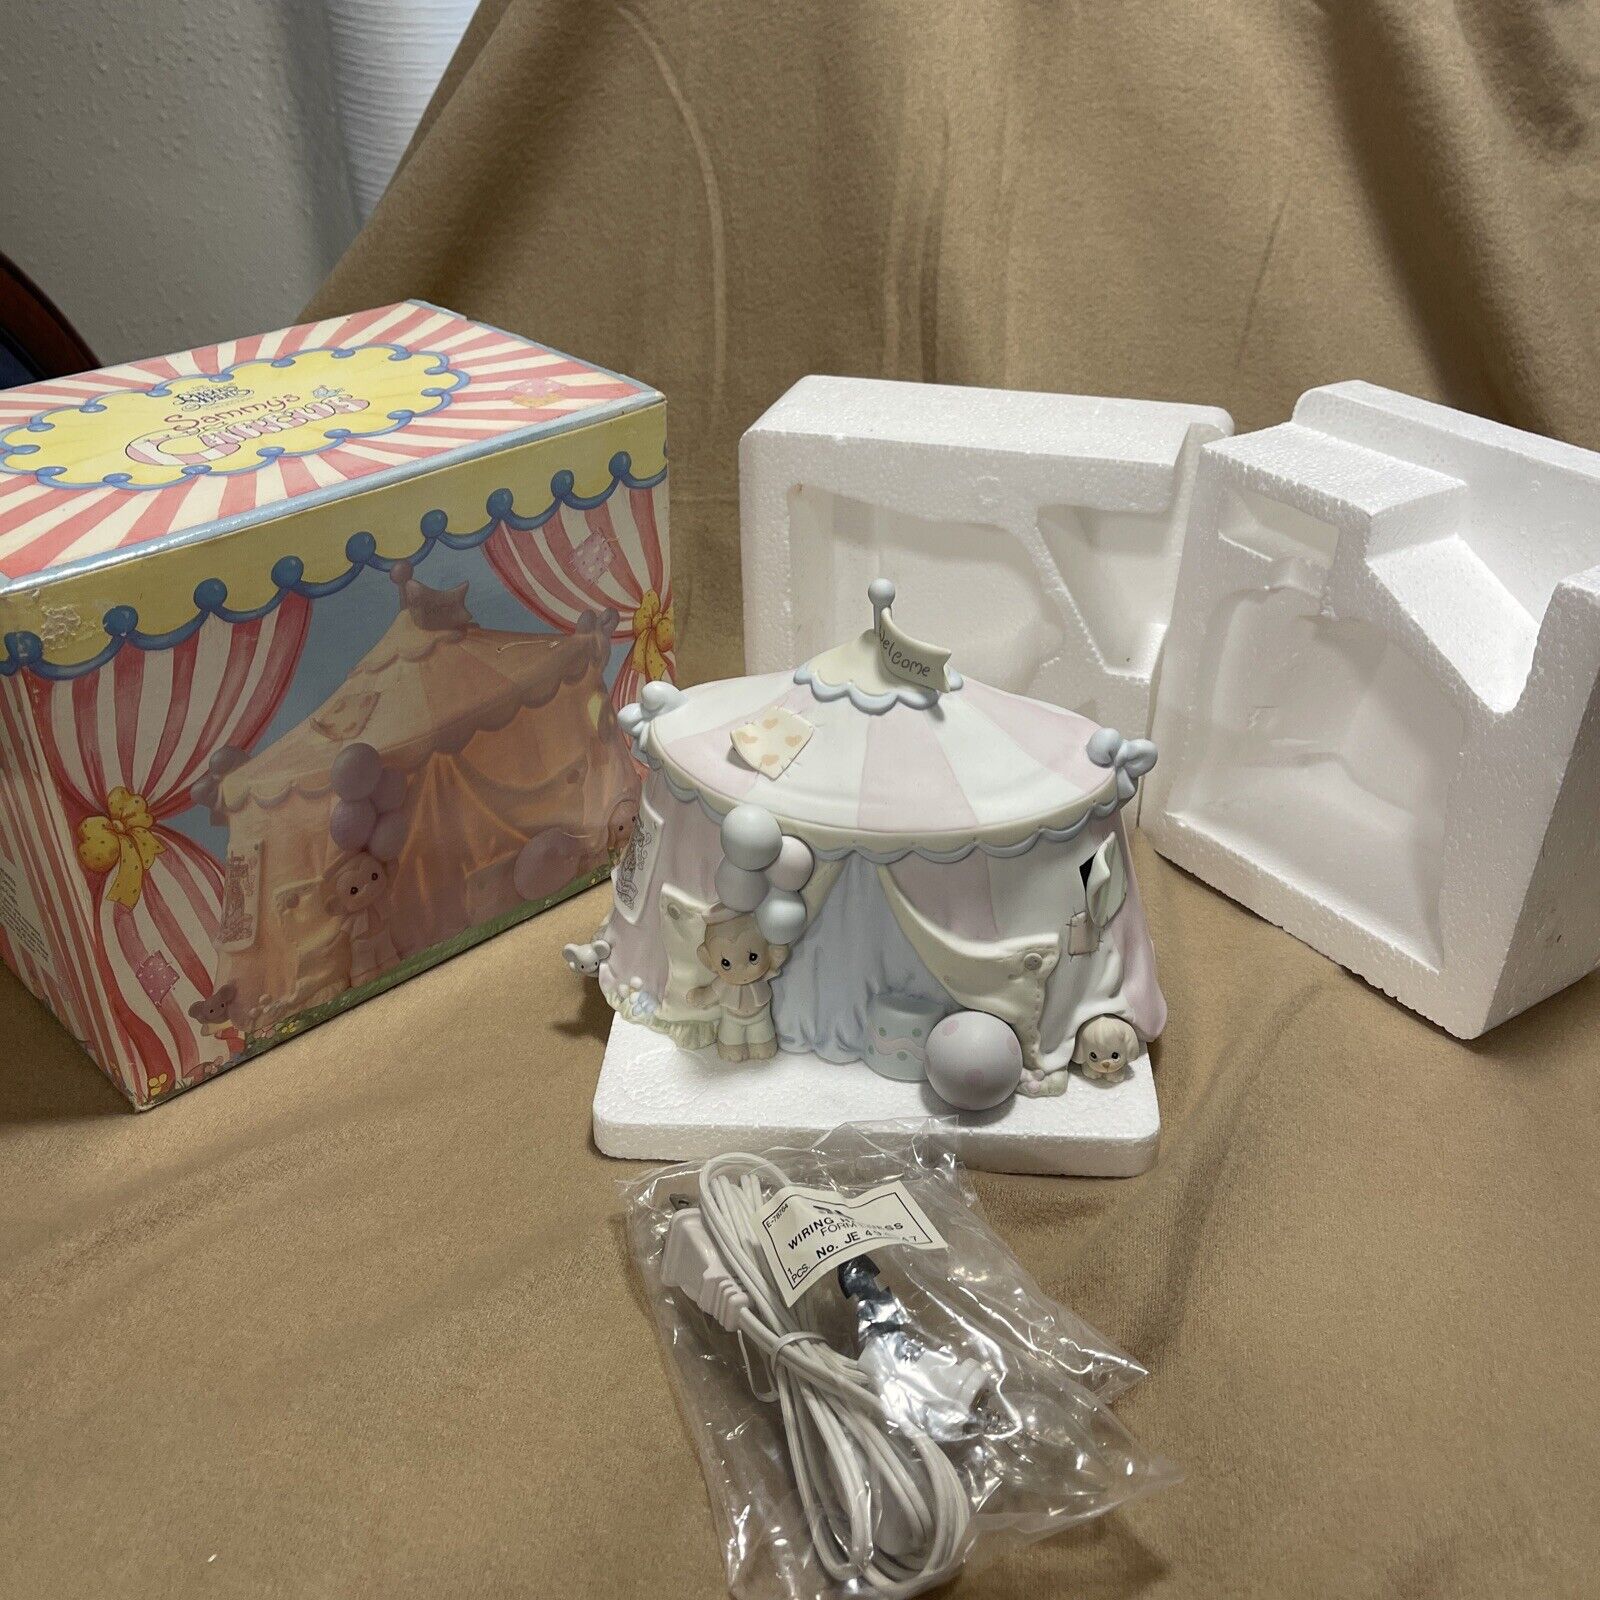 The Enesco precious moment s collection sammy’s circus tent night light